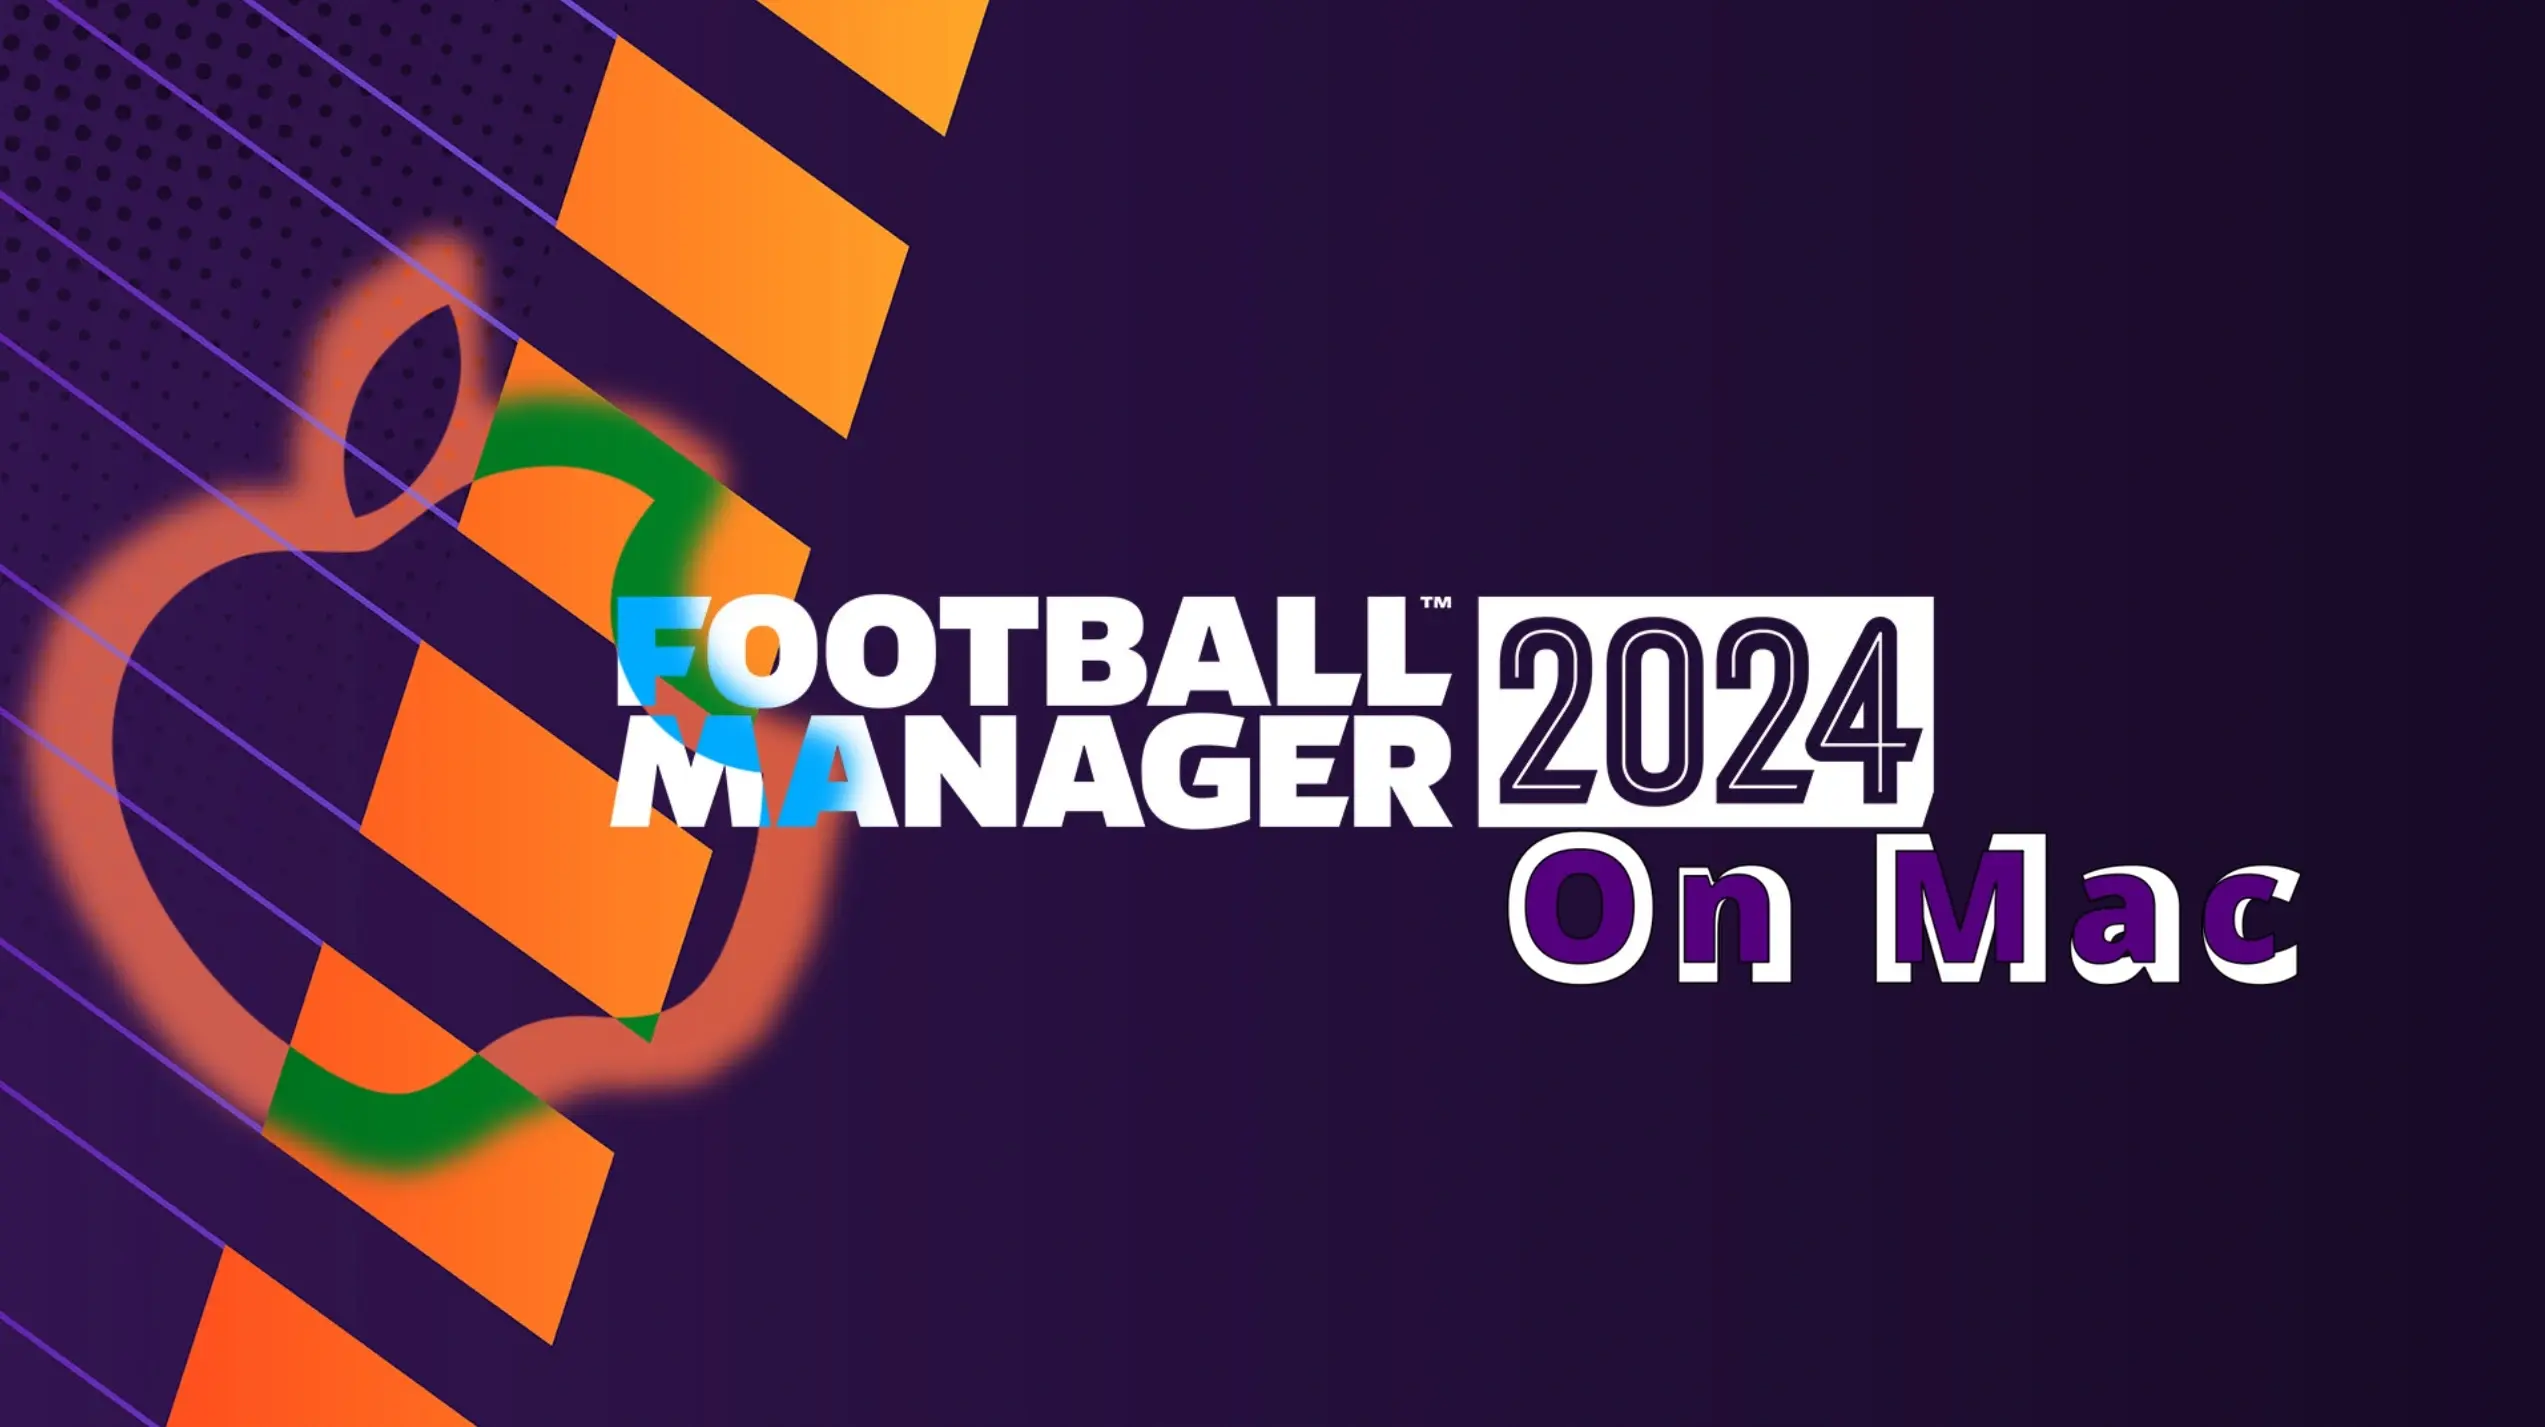 Football Manager 2024 on Mac